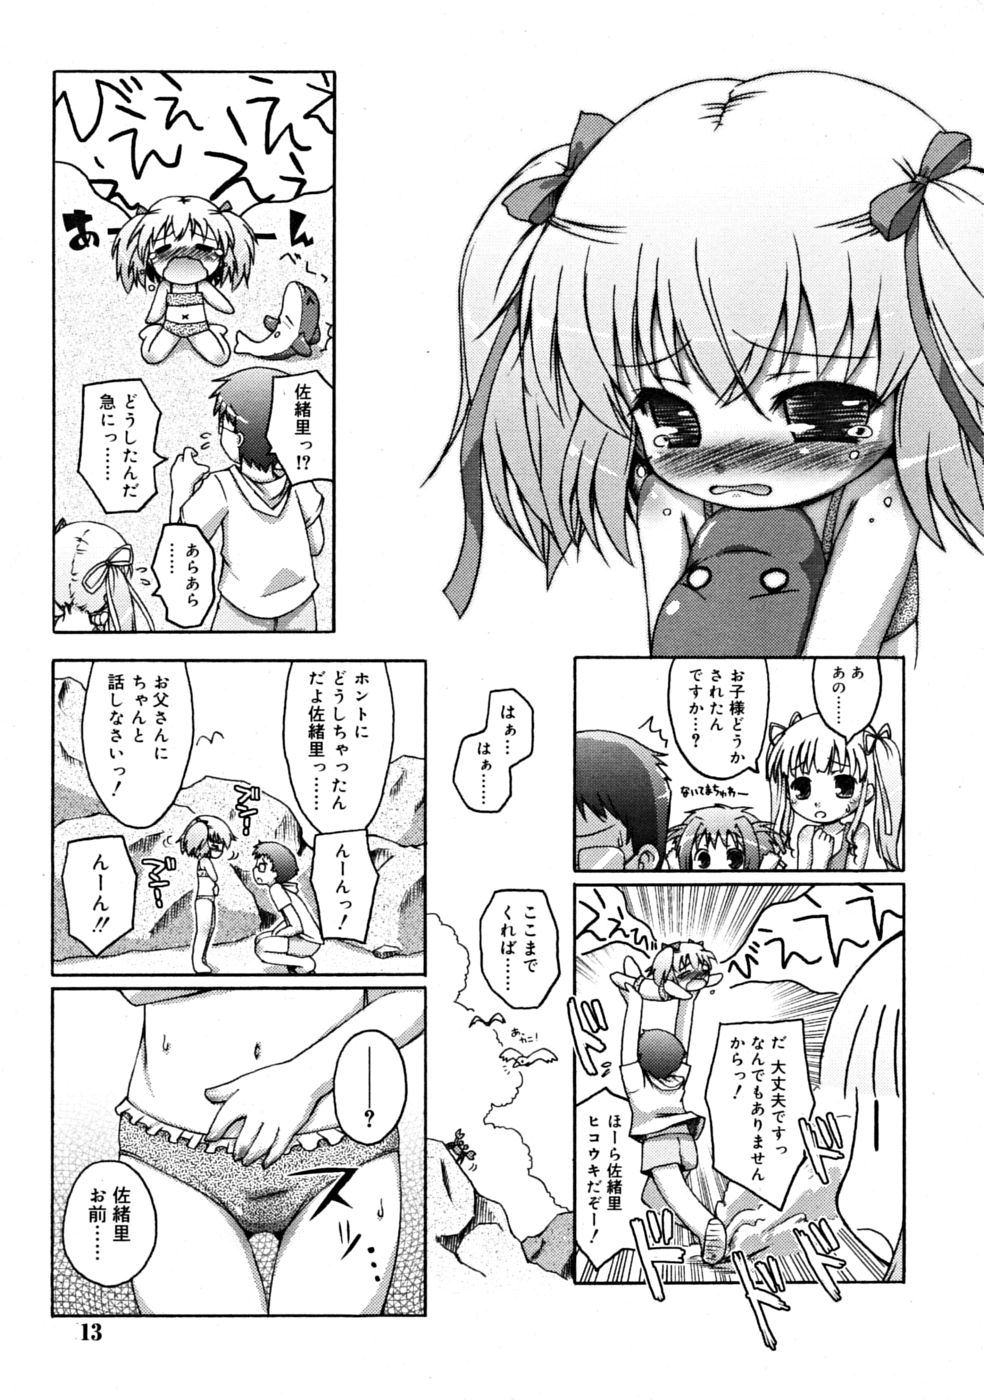 COMIC RiN 2008-09 page 13 full